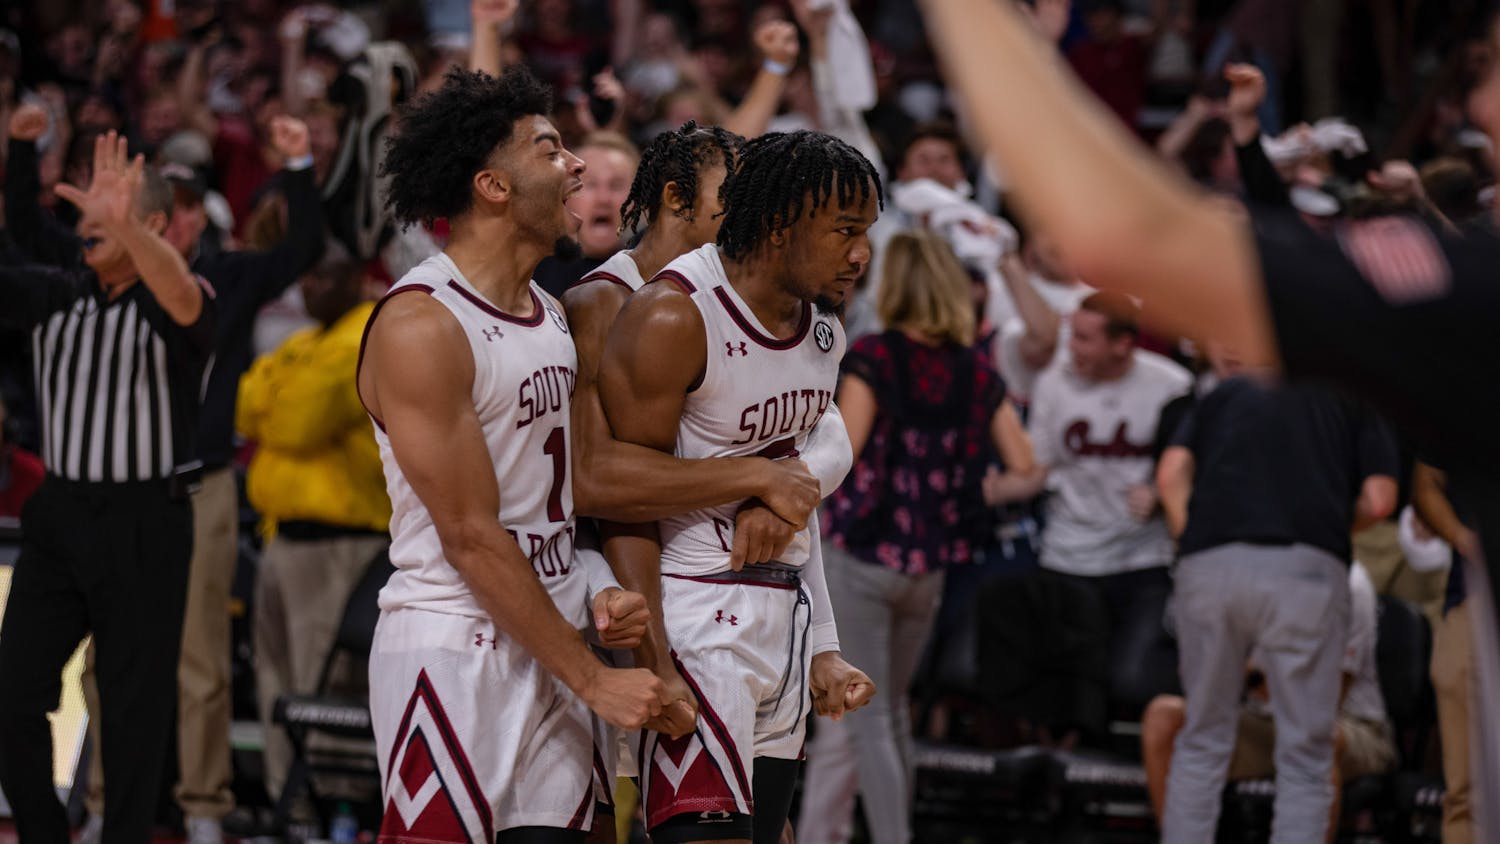 Senior guard Chico Carter is embraced by junior guard Meechie Johnson alongside sophomore guard Jacobi Wright after making the game winning shot against Clemson on Nov. 11, 2022. The Gamecocks beat the Tigers 60-58 in a highly anticipated back-and-forth match.